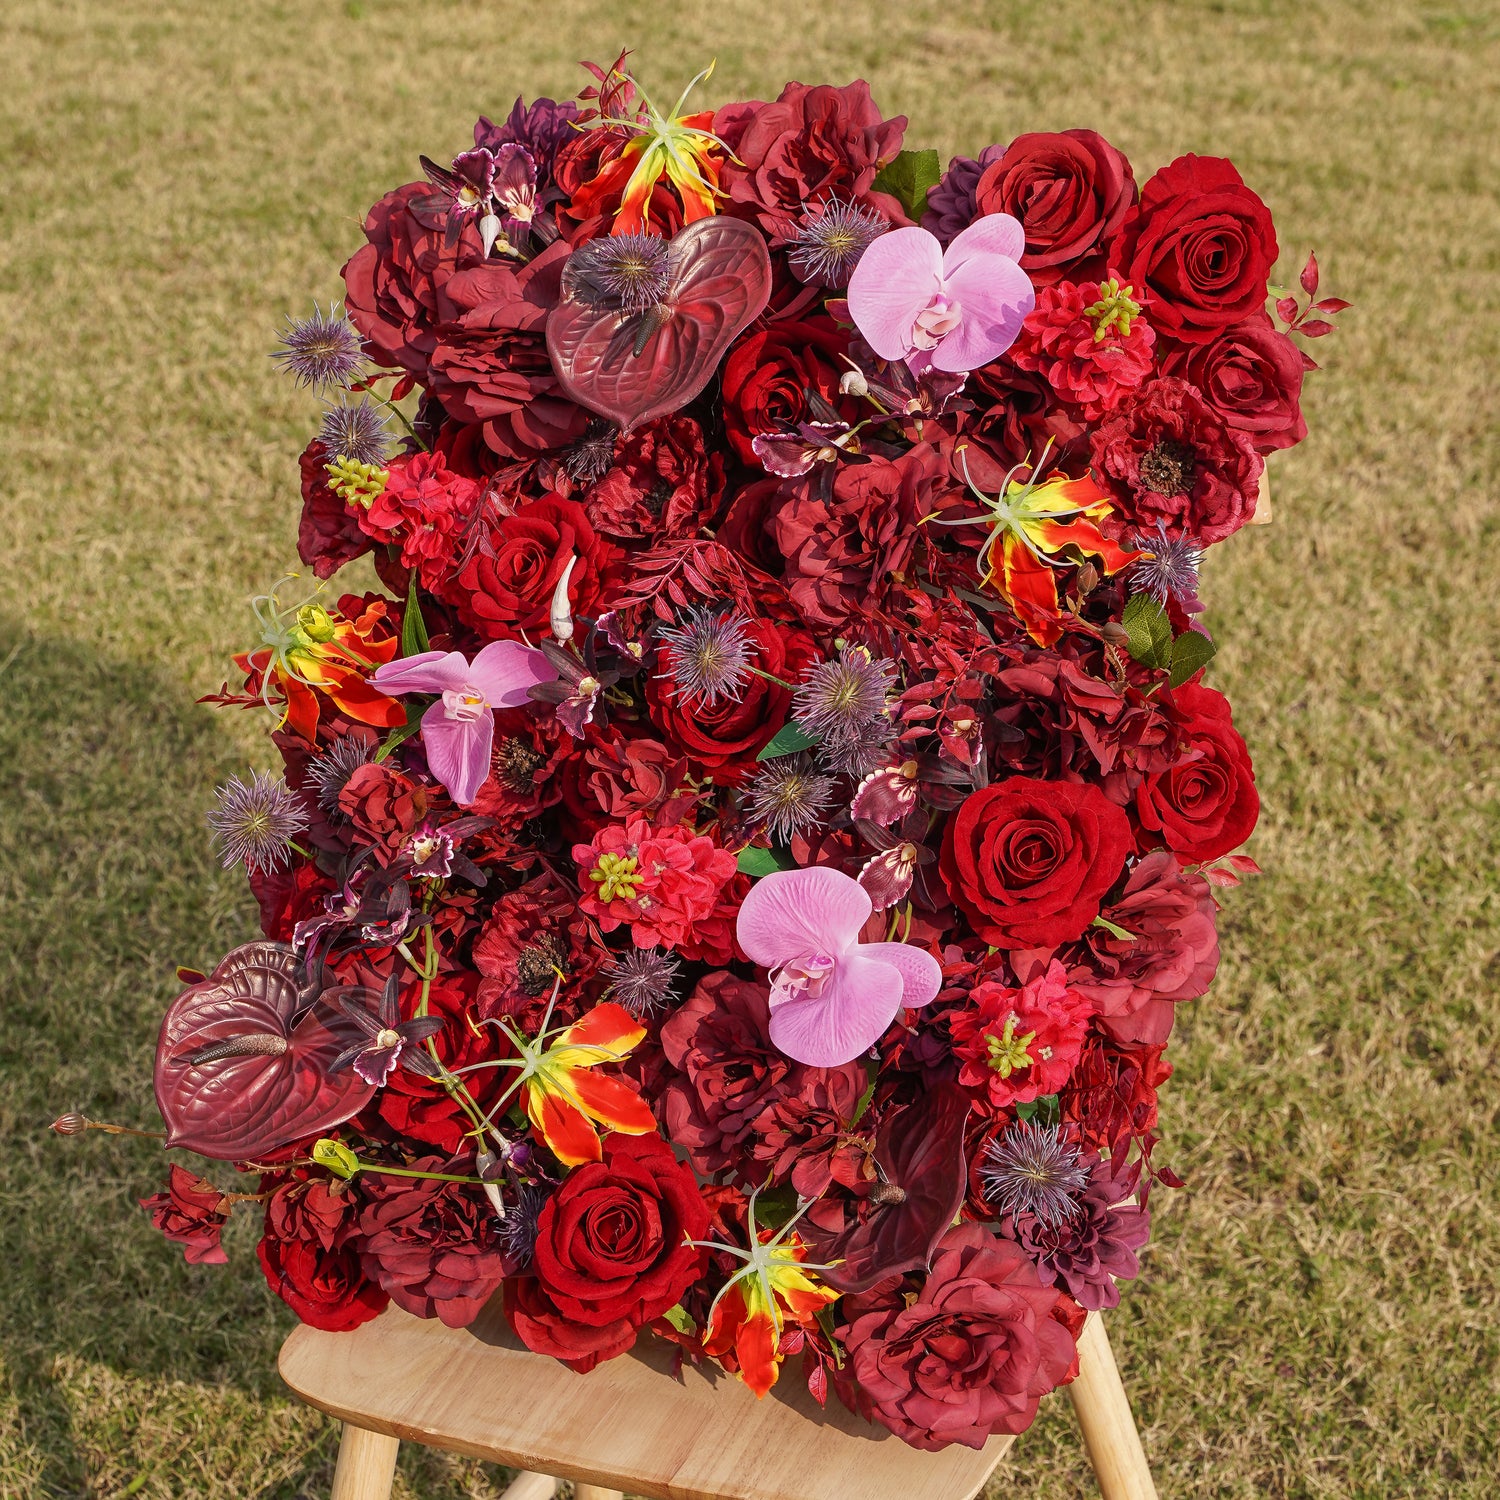 Rose Morning???The flower walls are made of artificial flowers in various colors, layered at different levels to create a lush, elegant and natural look. The exclusive zipper design and roll-up design make it easy to install and remove.??¨¤